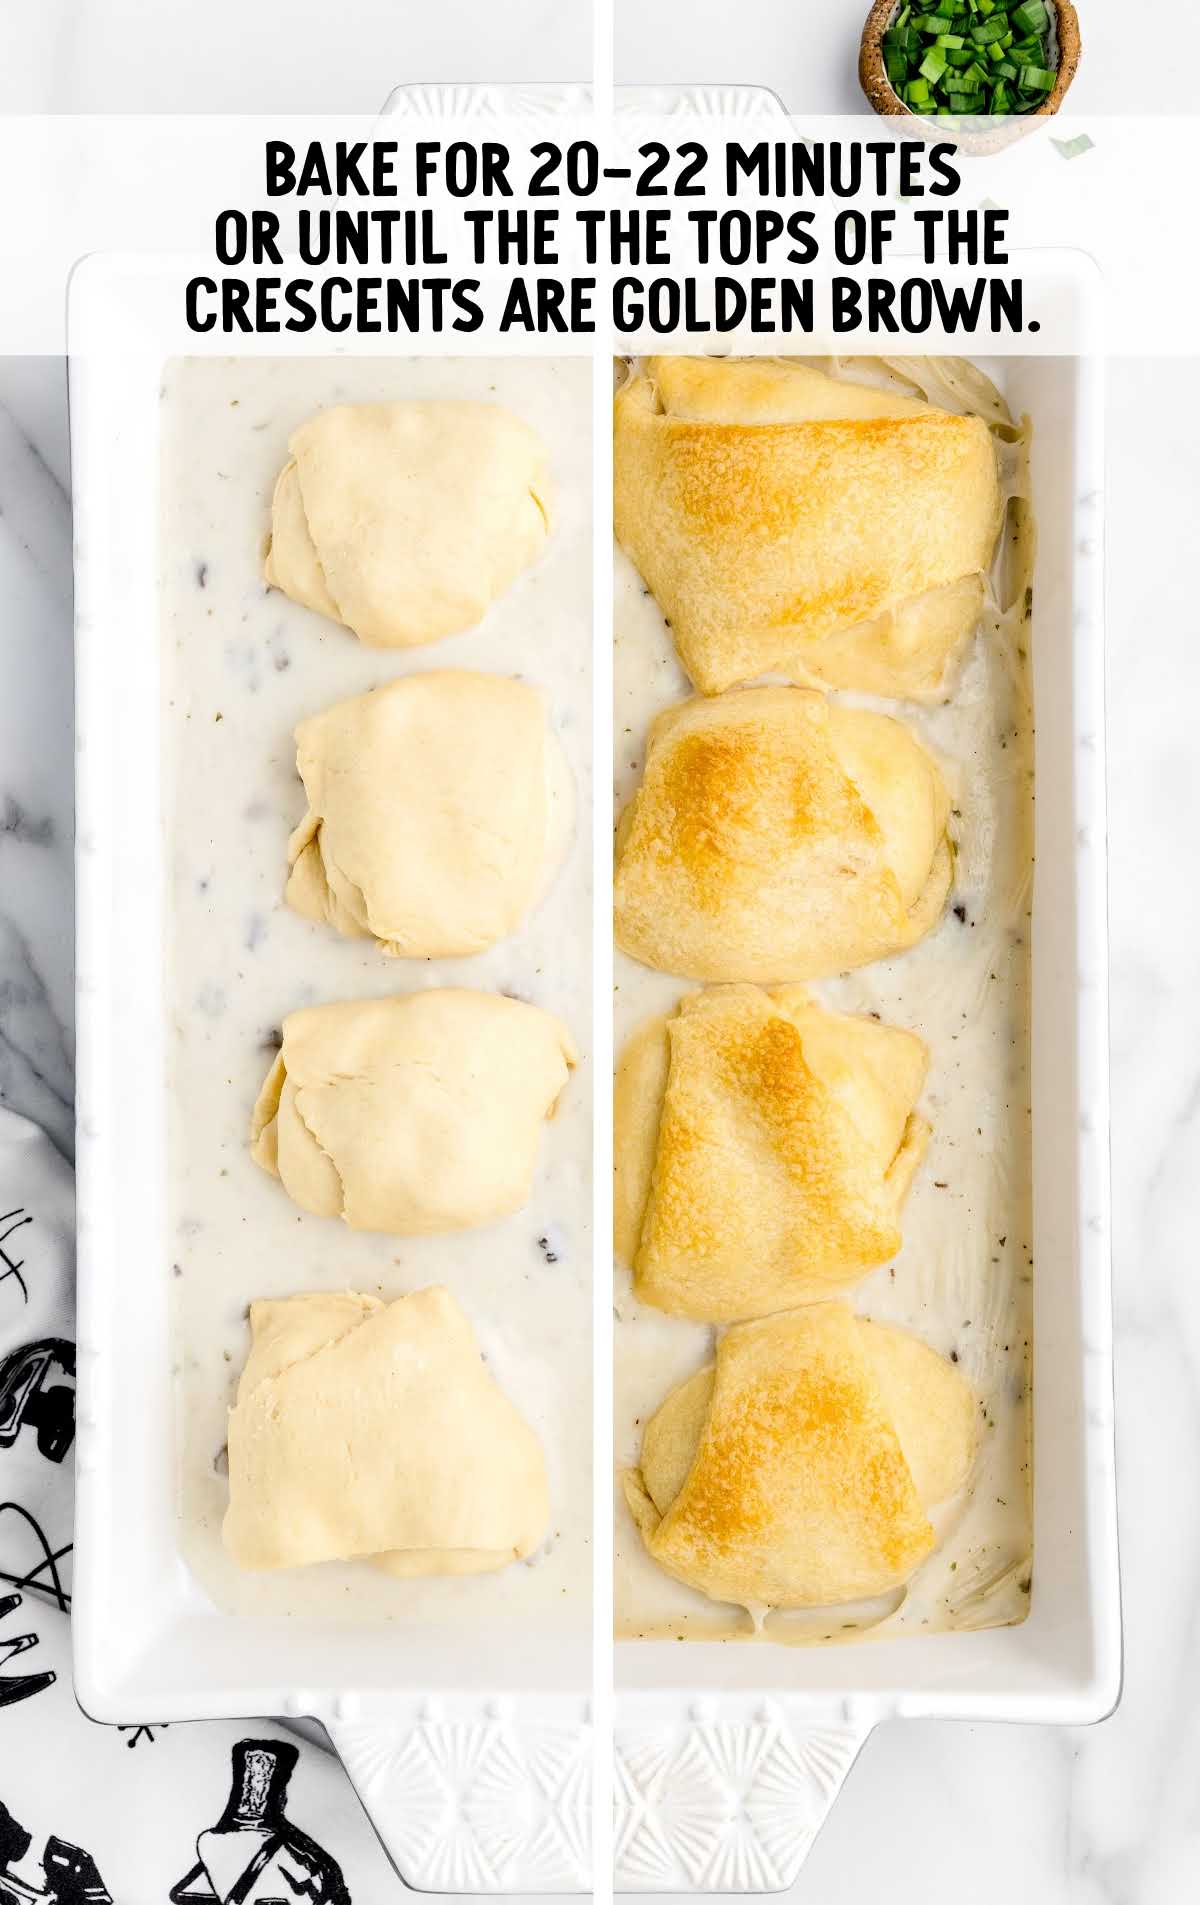 Chicken Crescent Rolls baked for 20-22 minutes